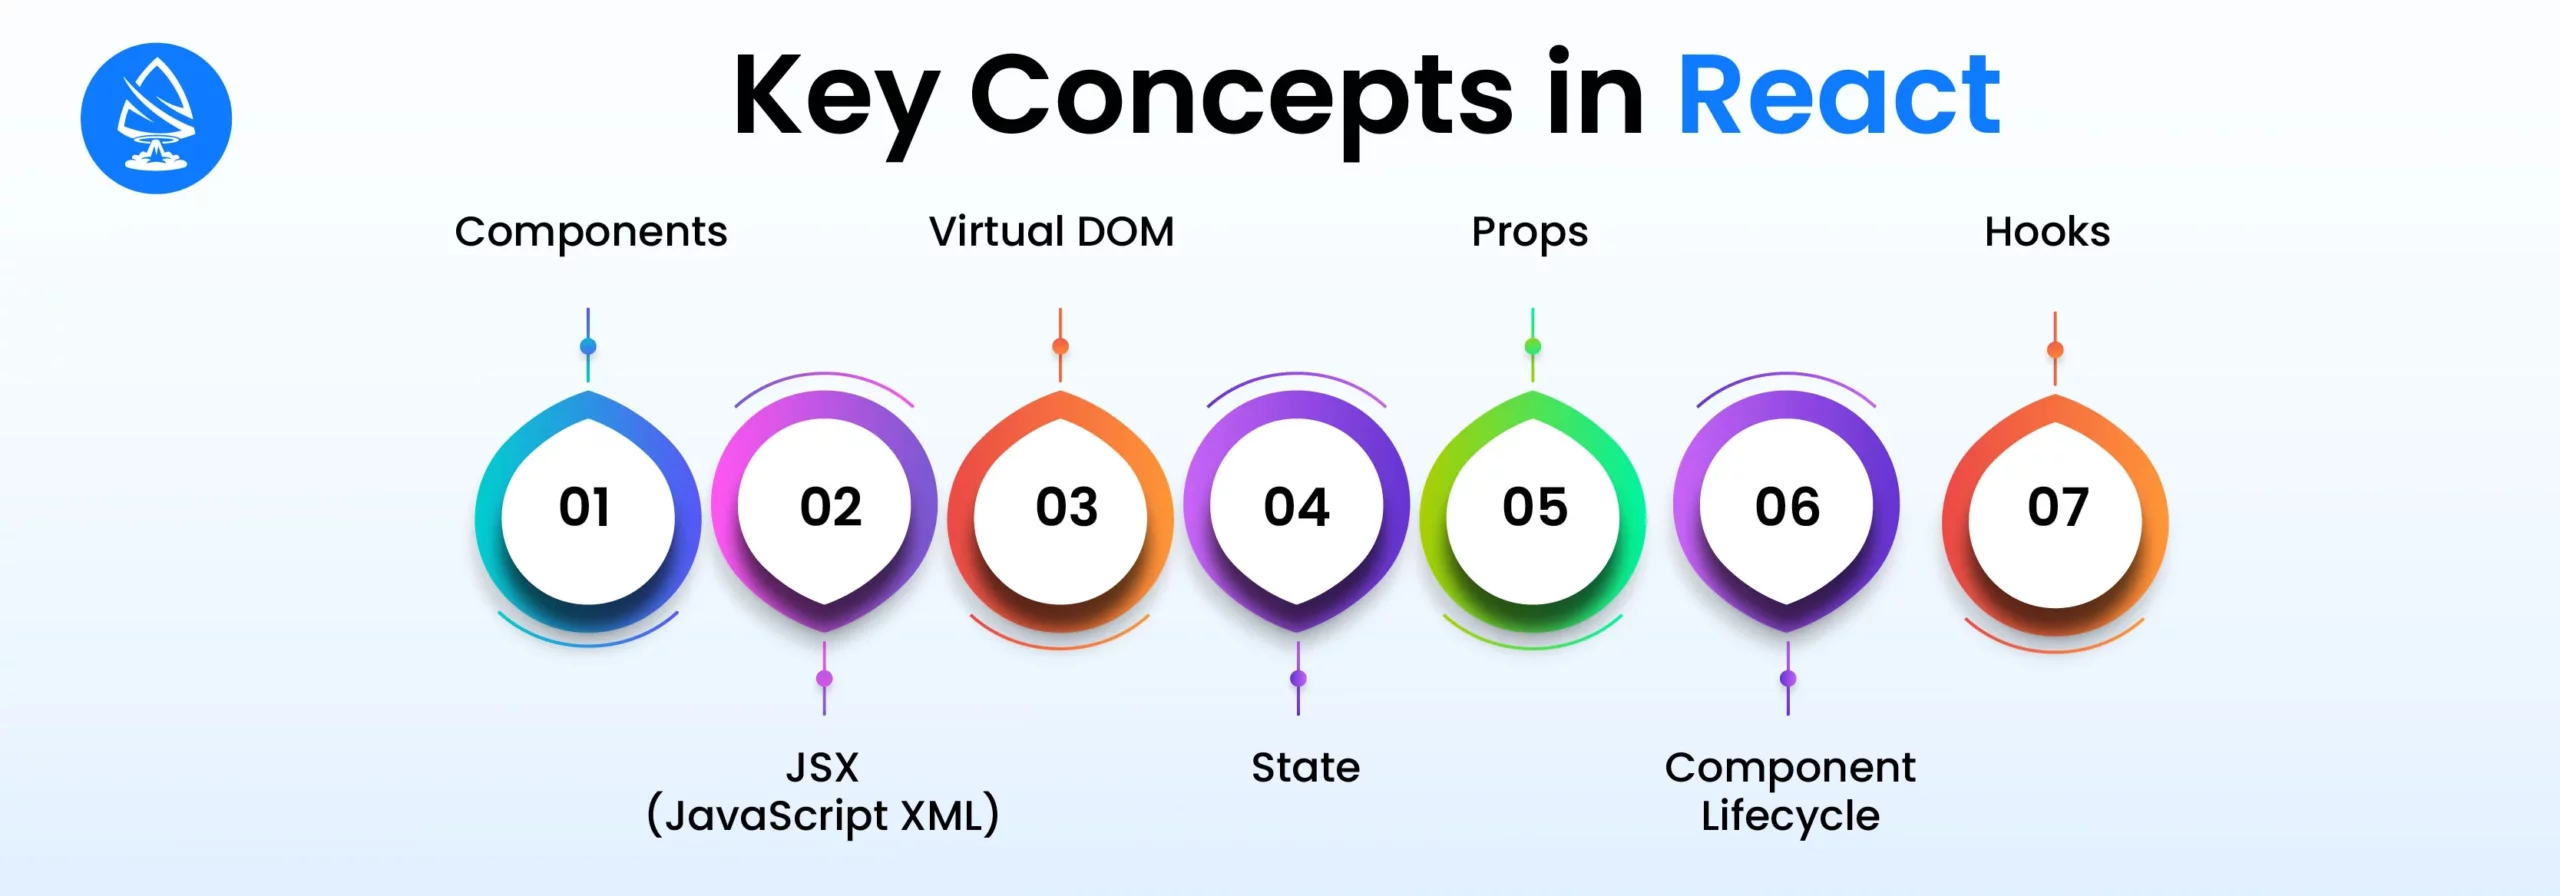 Key Concepts in React 